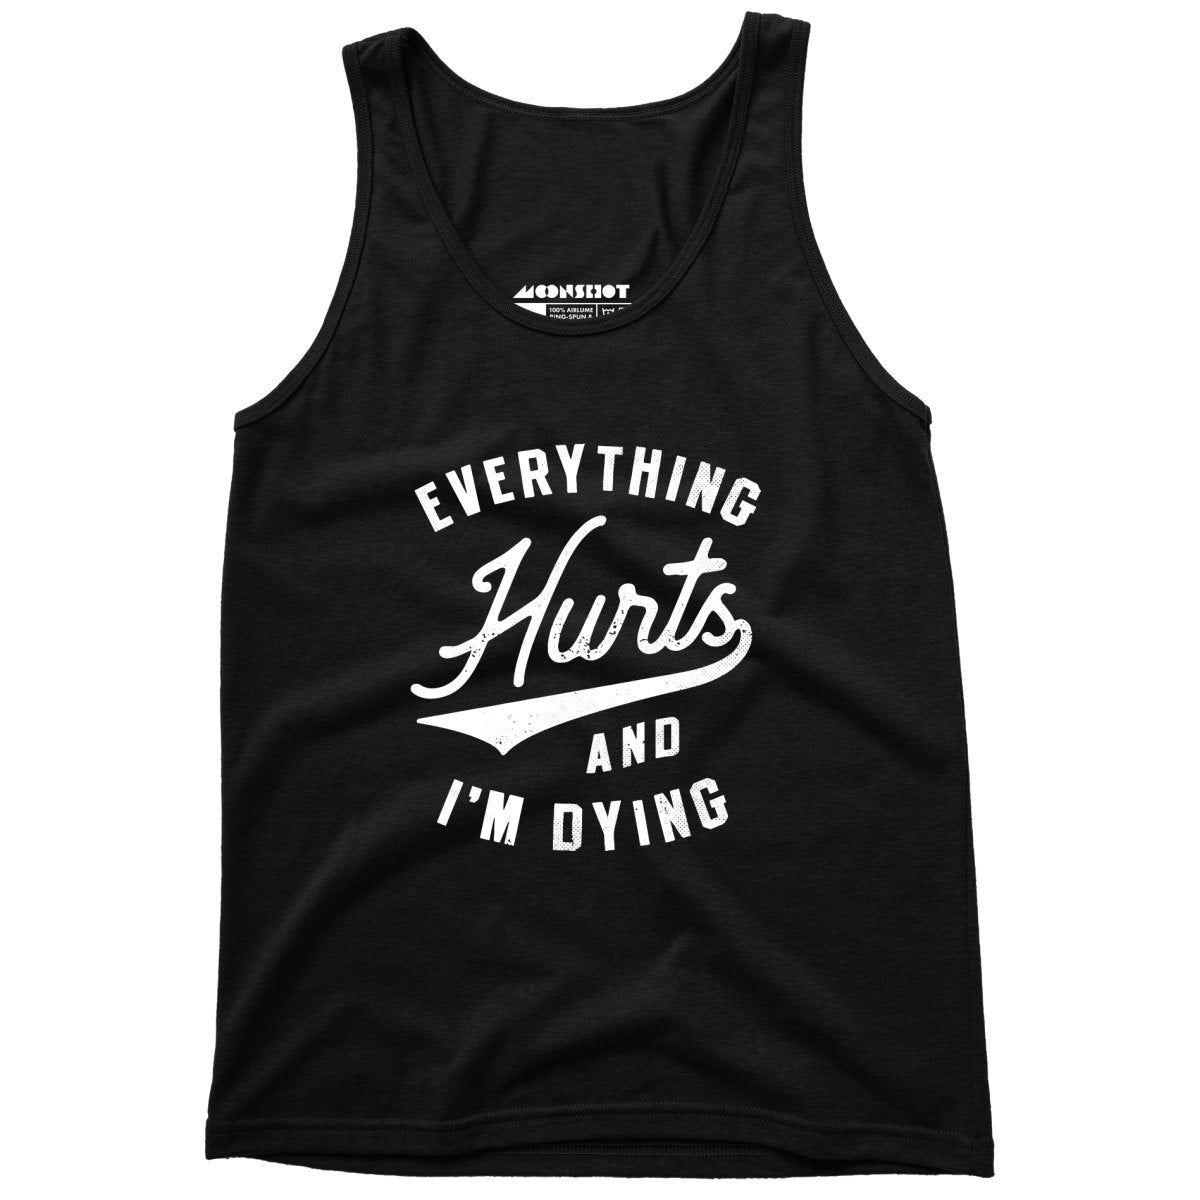 Everything Hurts and I'm Dying - Unisex Tank Top